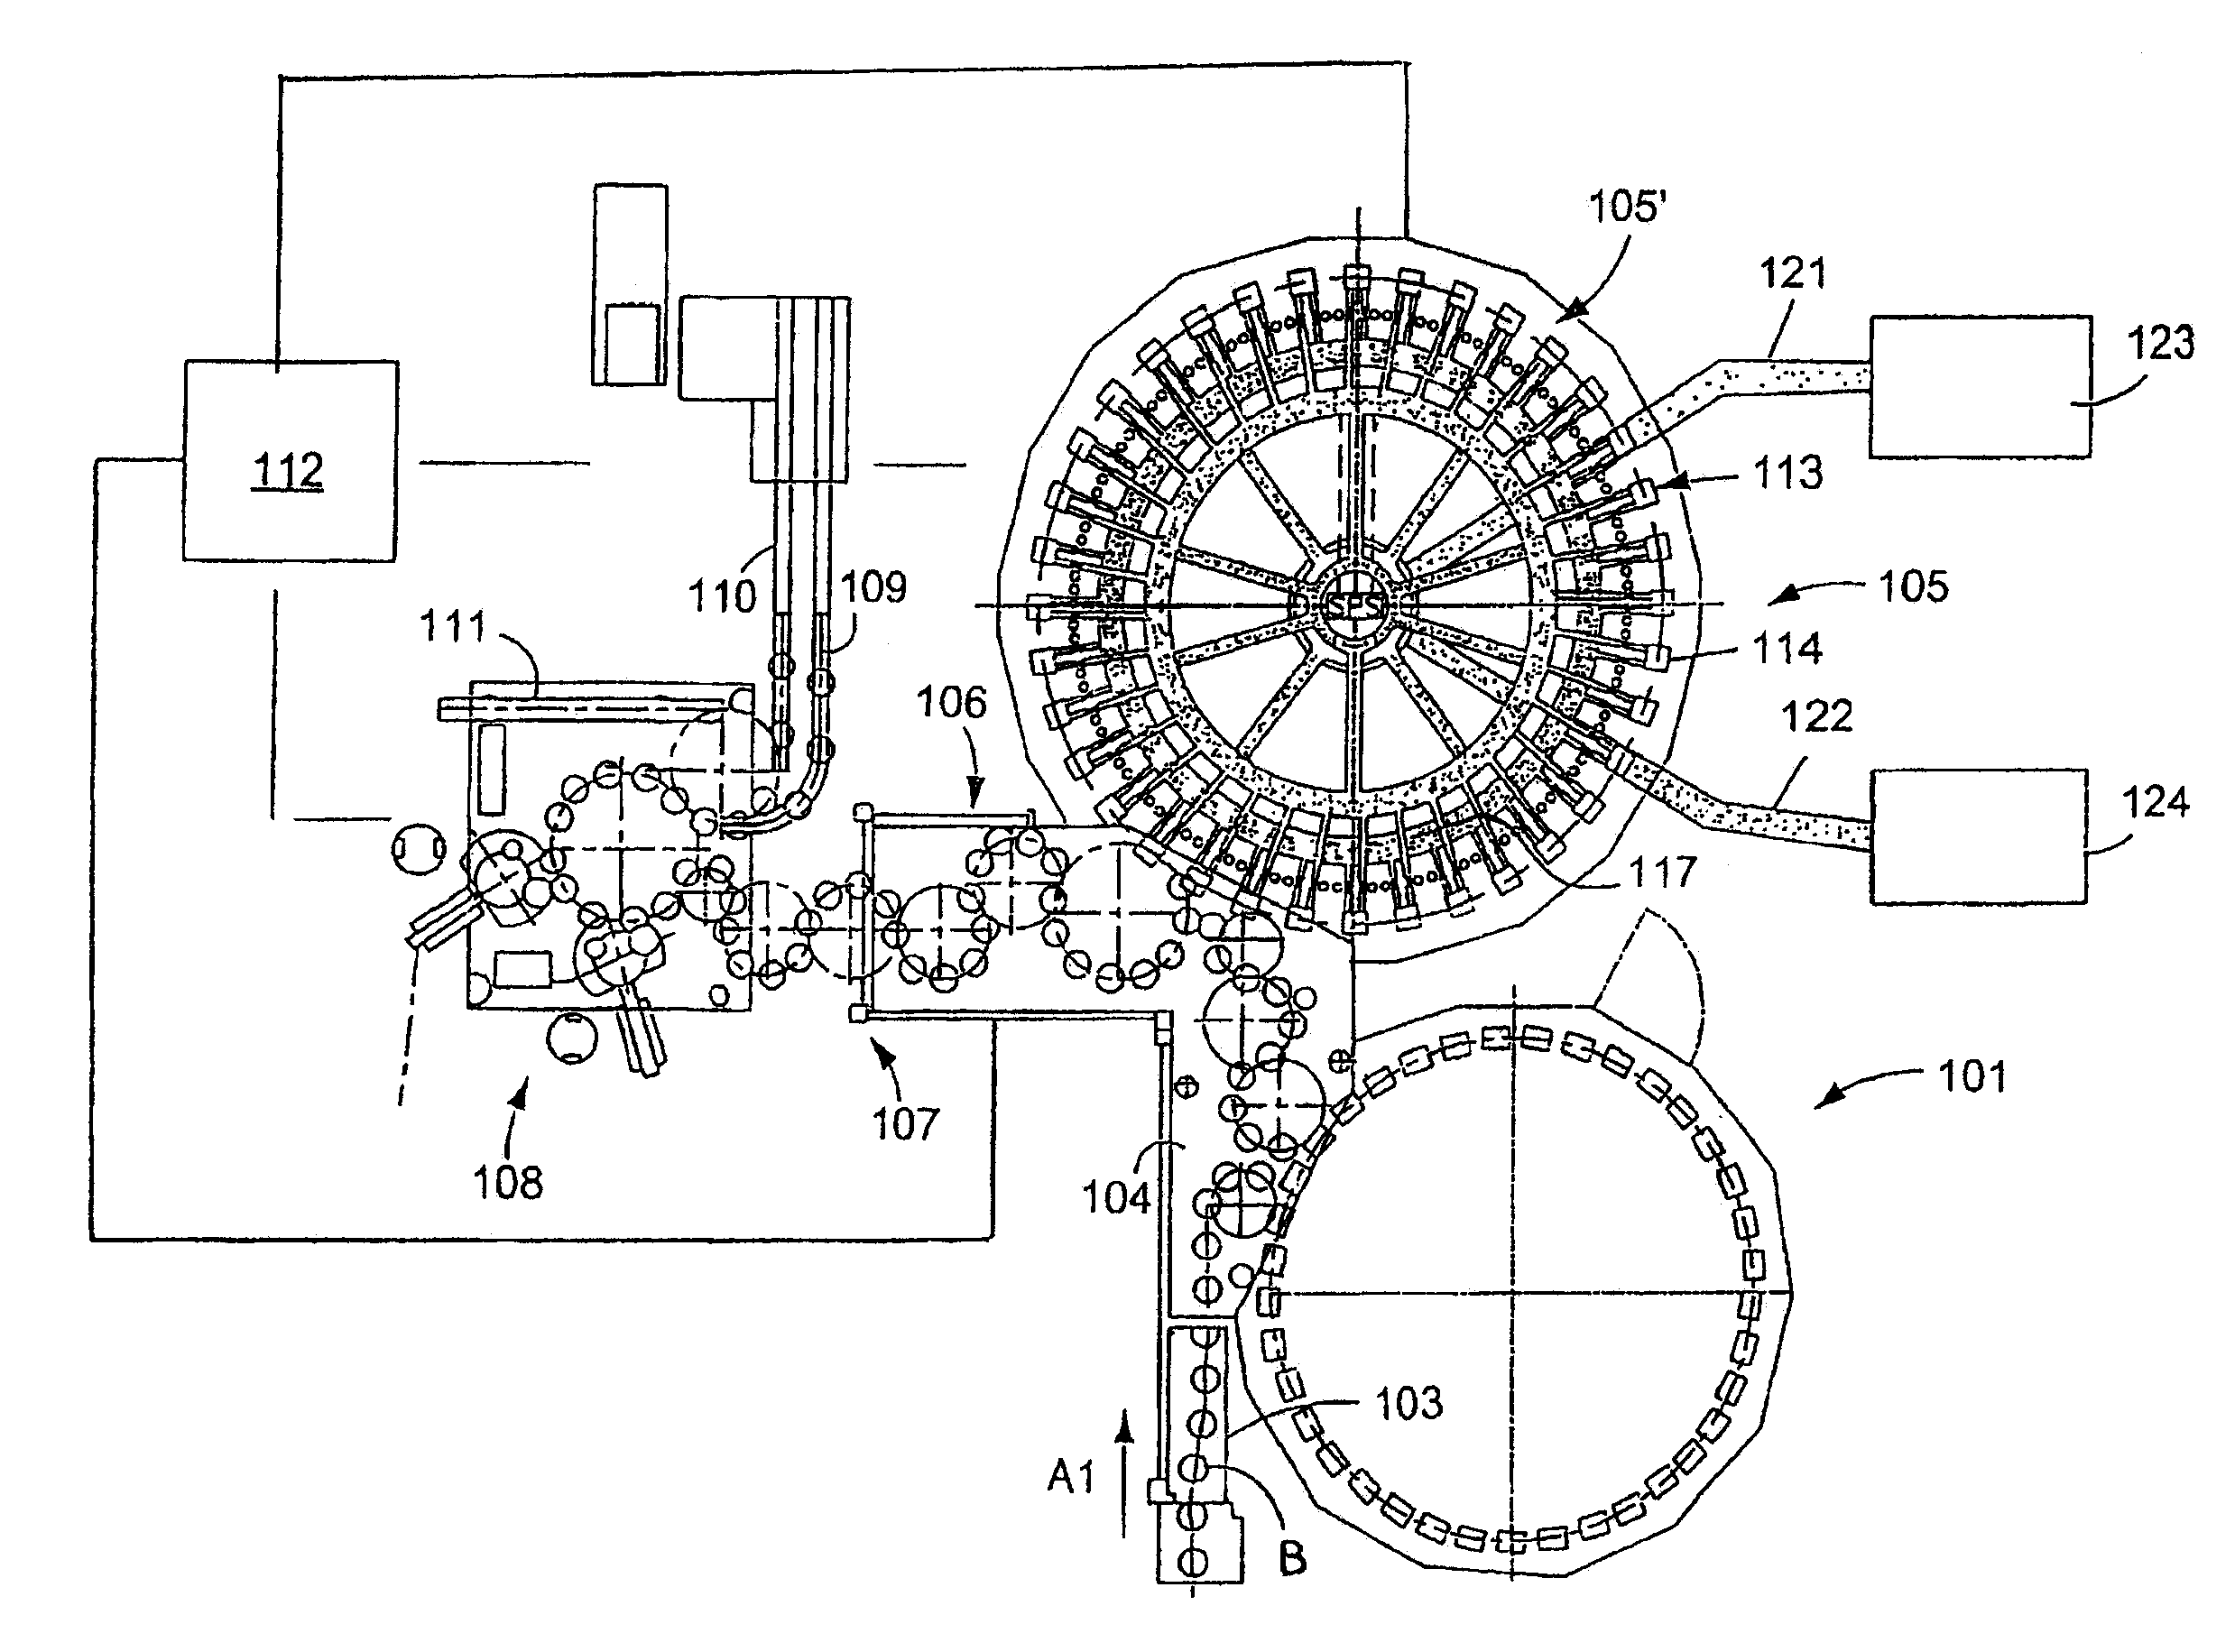 Method and apparatus for the circumferential printing onto individual bottles in a run of bottles where the individual bottles in the run have at least one varying dimension due to manufacturing tolerances, the method and apparatus providing more consistent artwork on individual containers in the run of containers